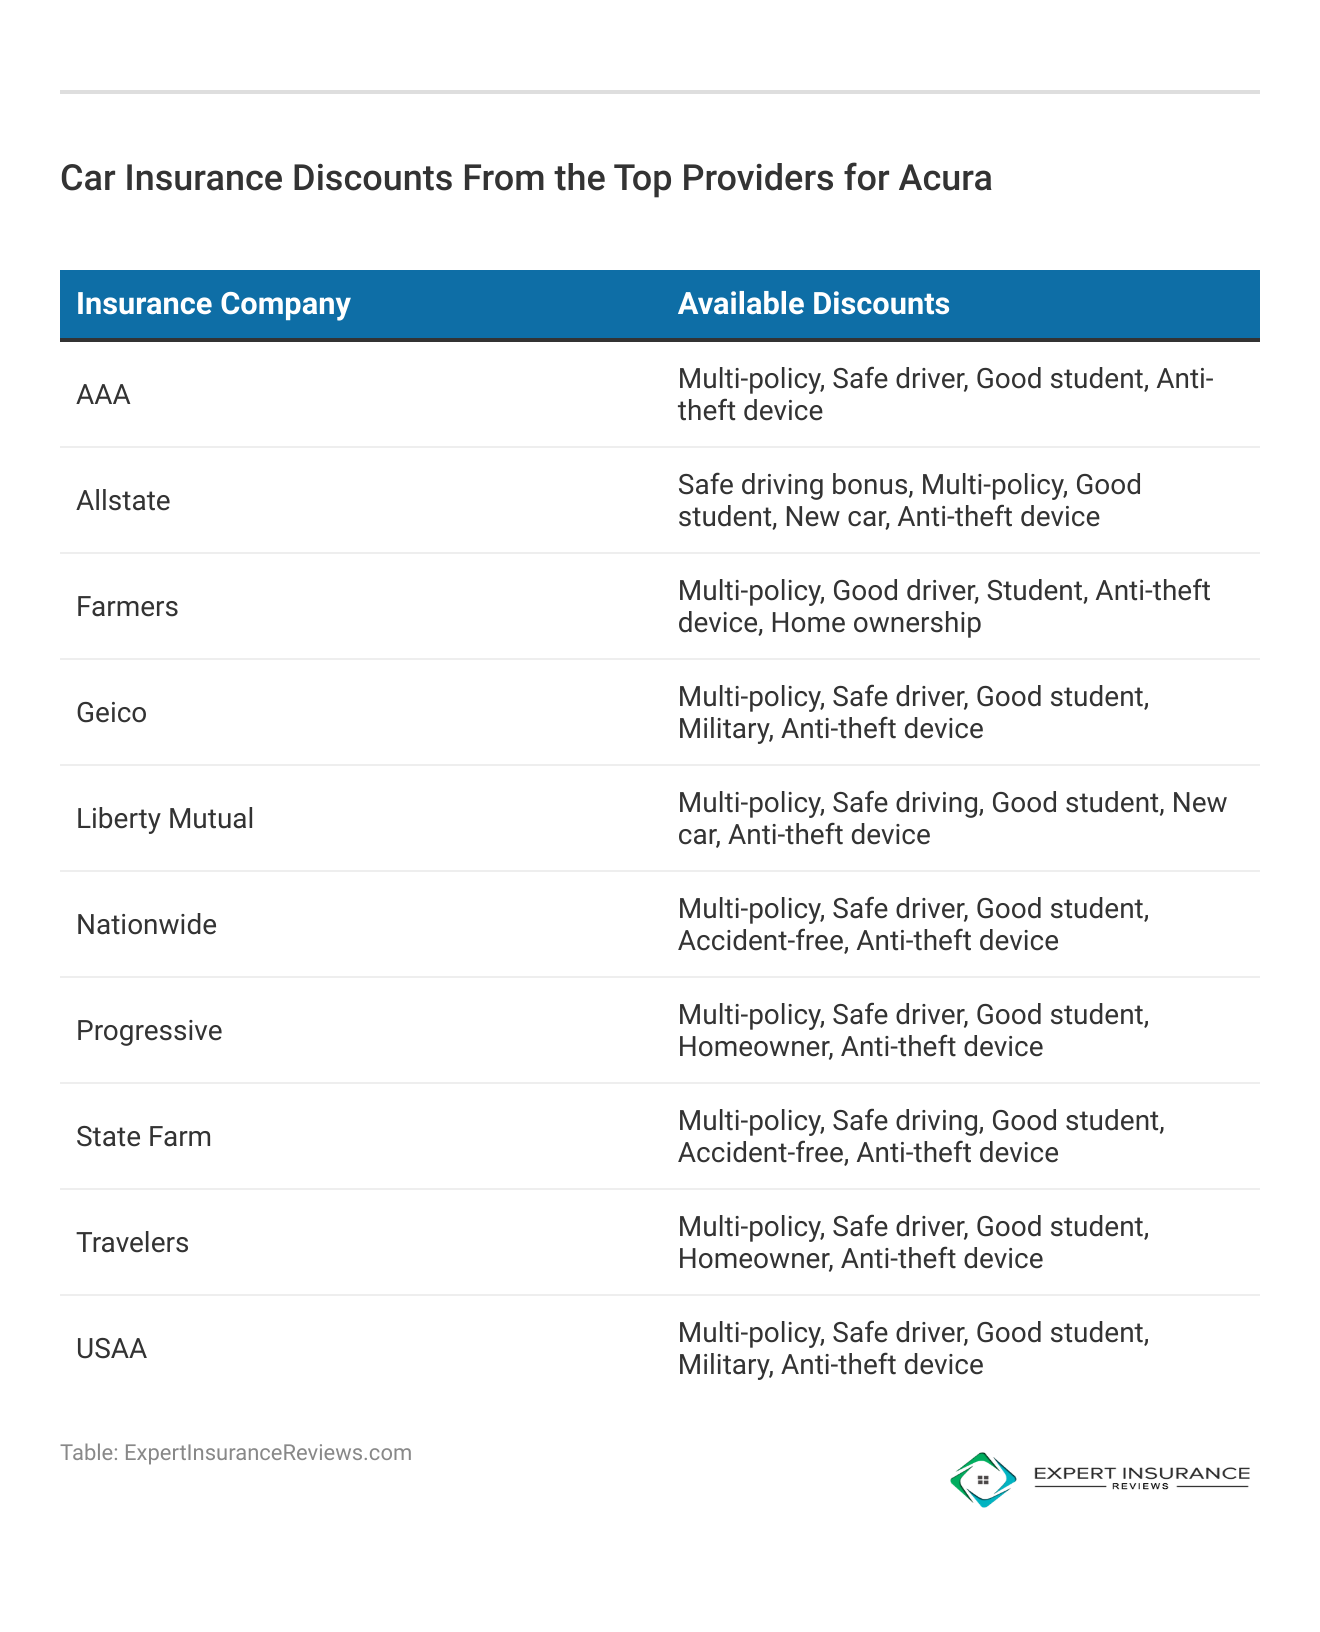 <h3>Car Insurance Discounts From the Top Providers for Acura</h3>